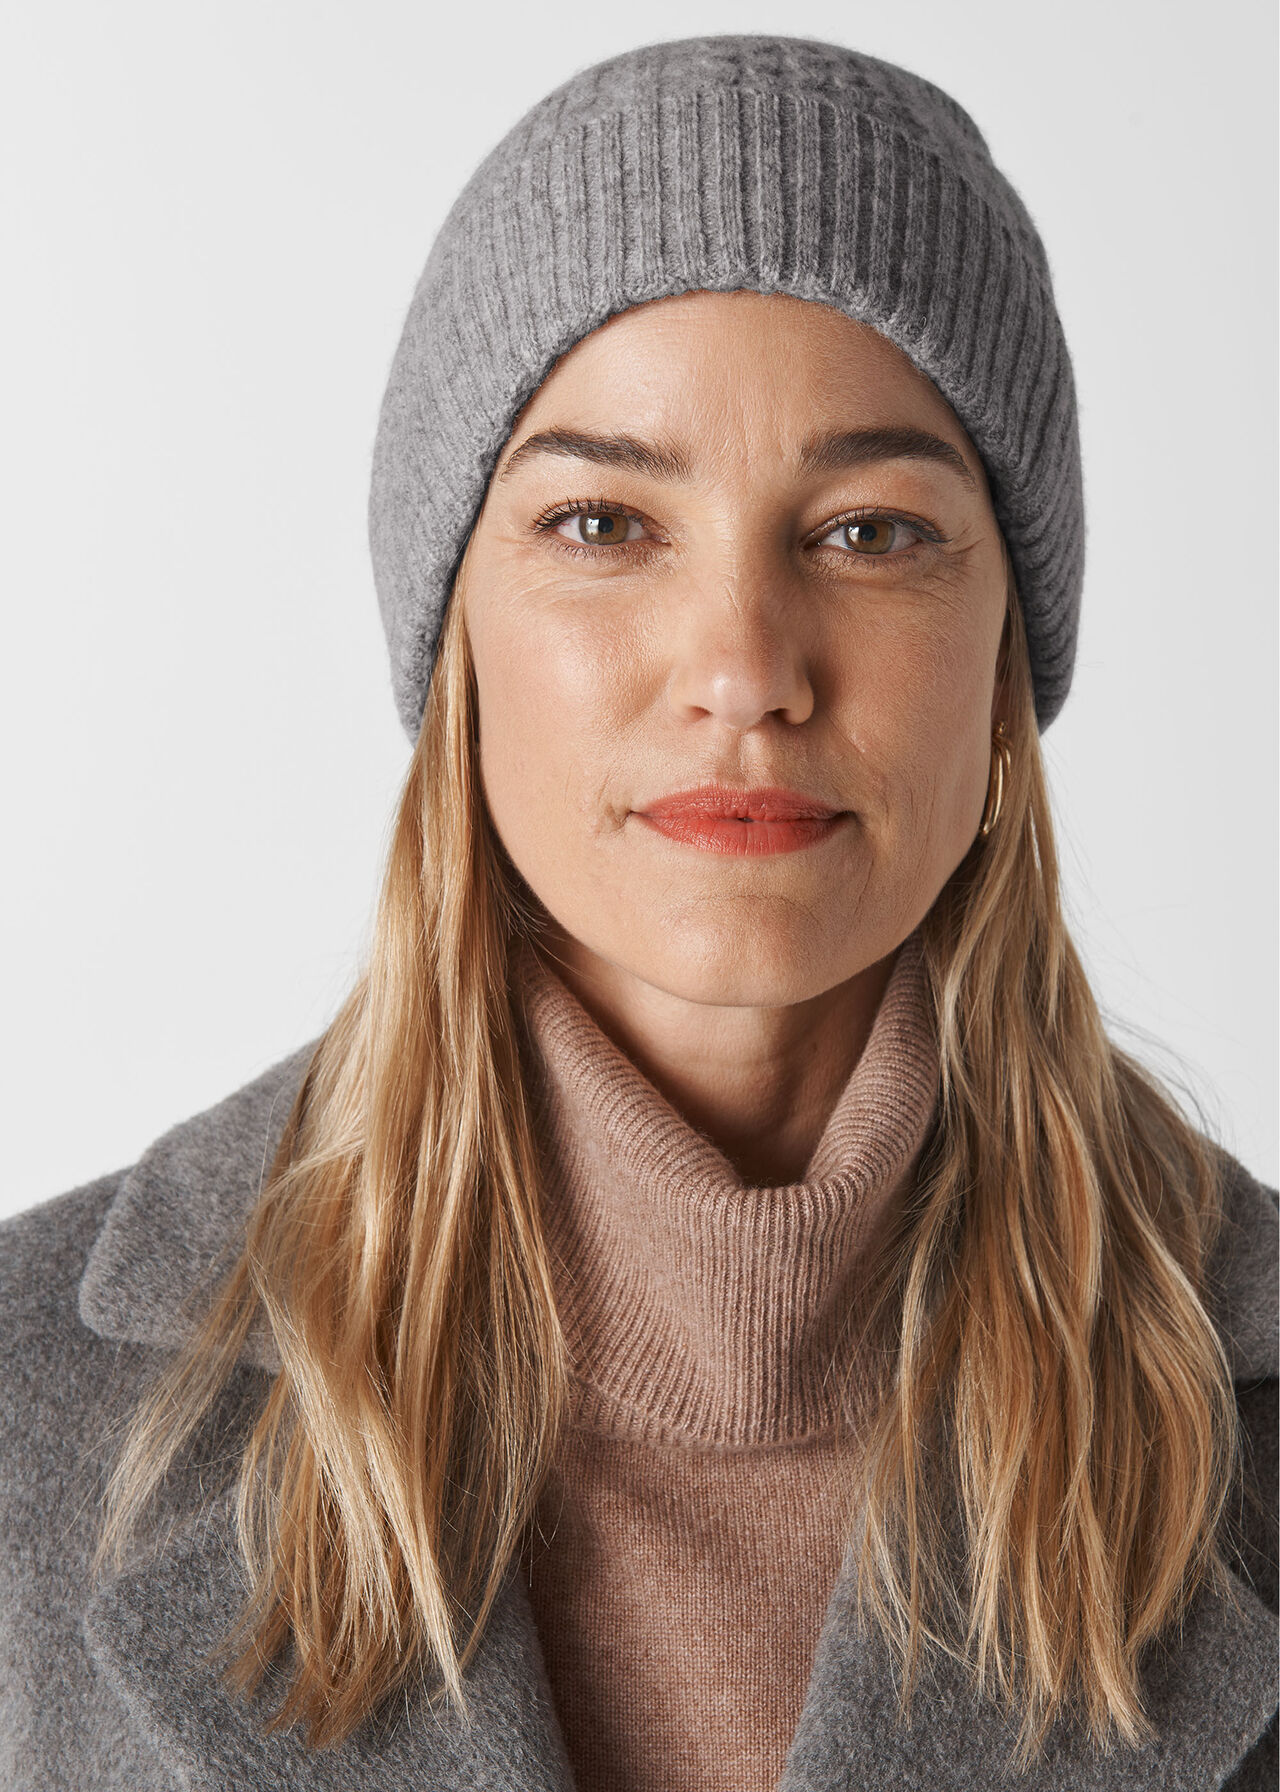 Cable Knit Beanie Hat Grey